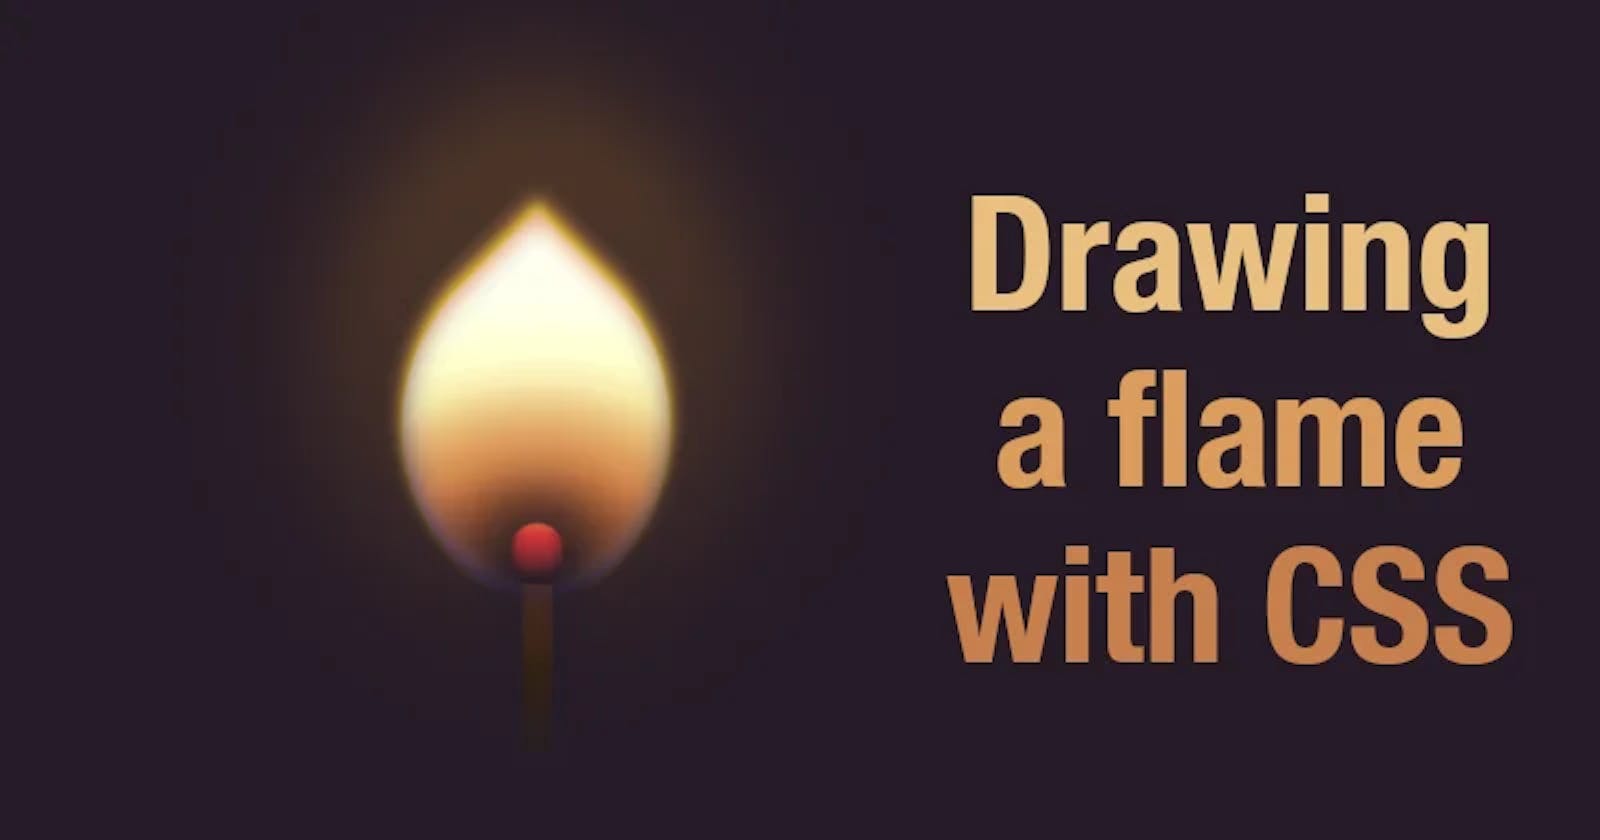 Drawing a flame with CSS